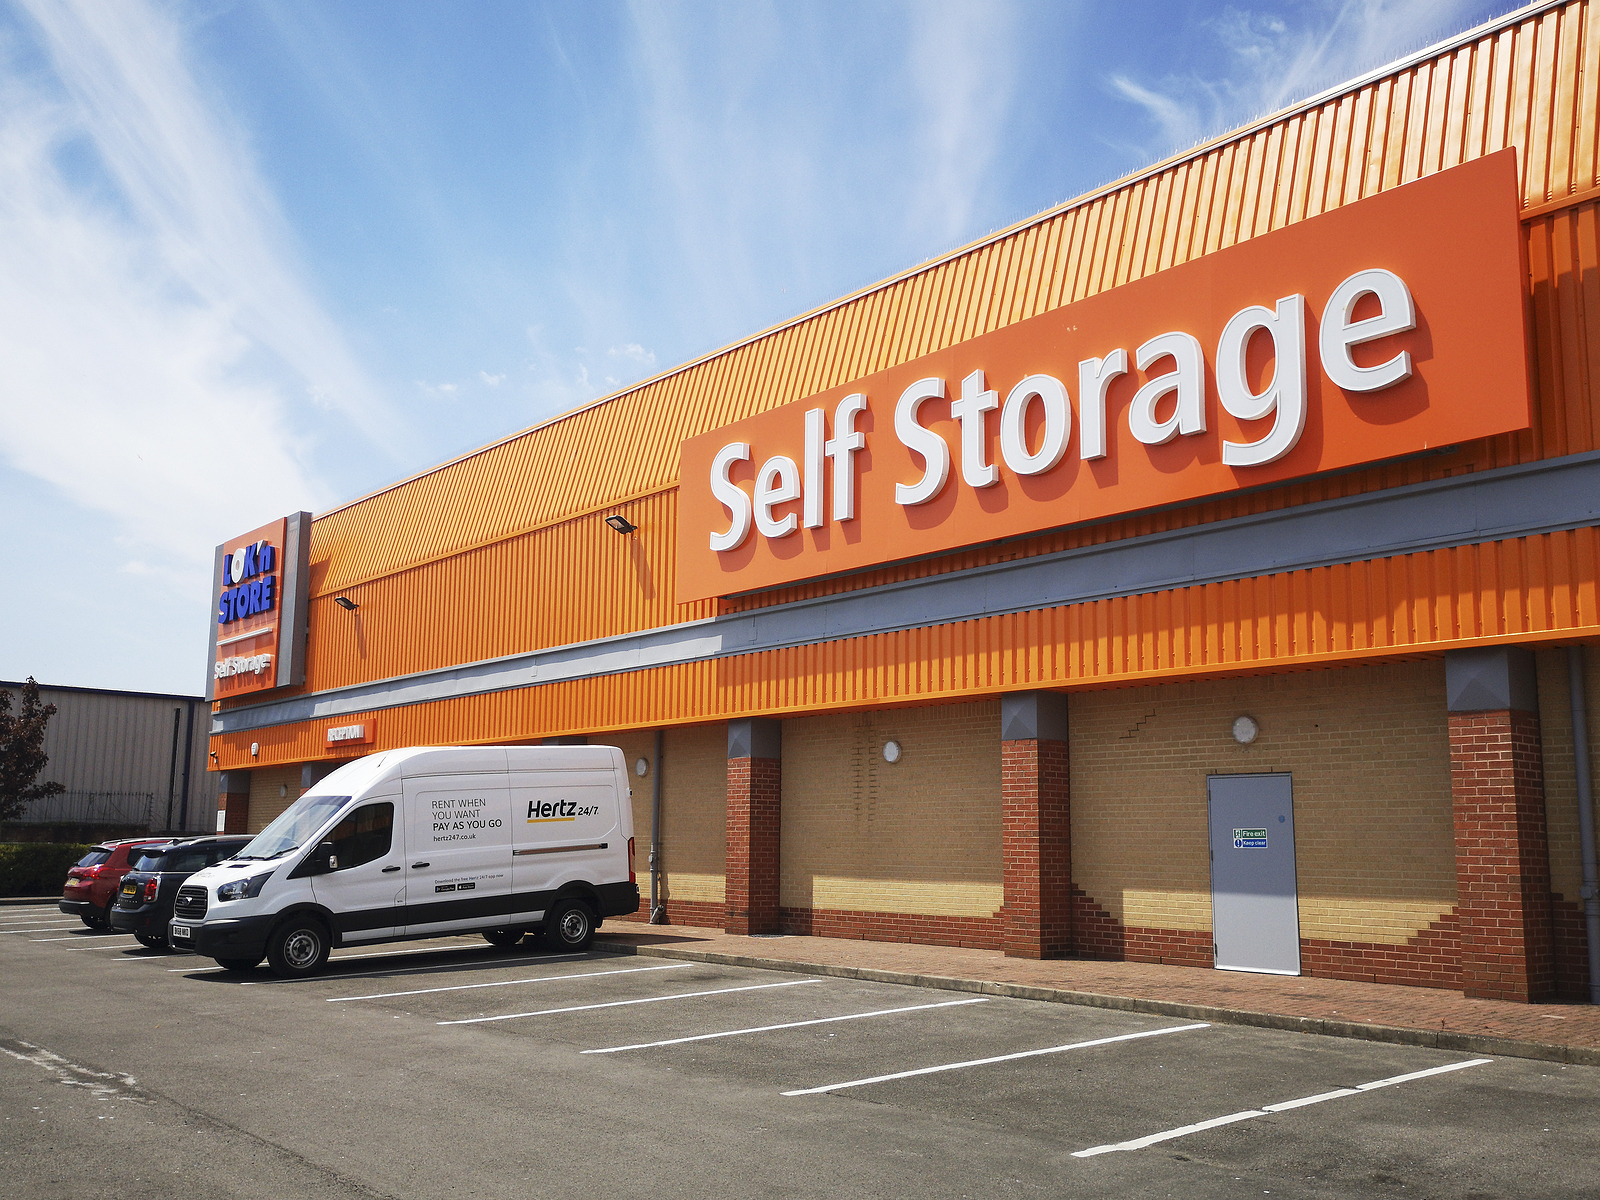 Self storage facility in Wyong